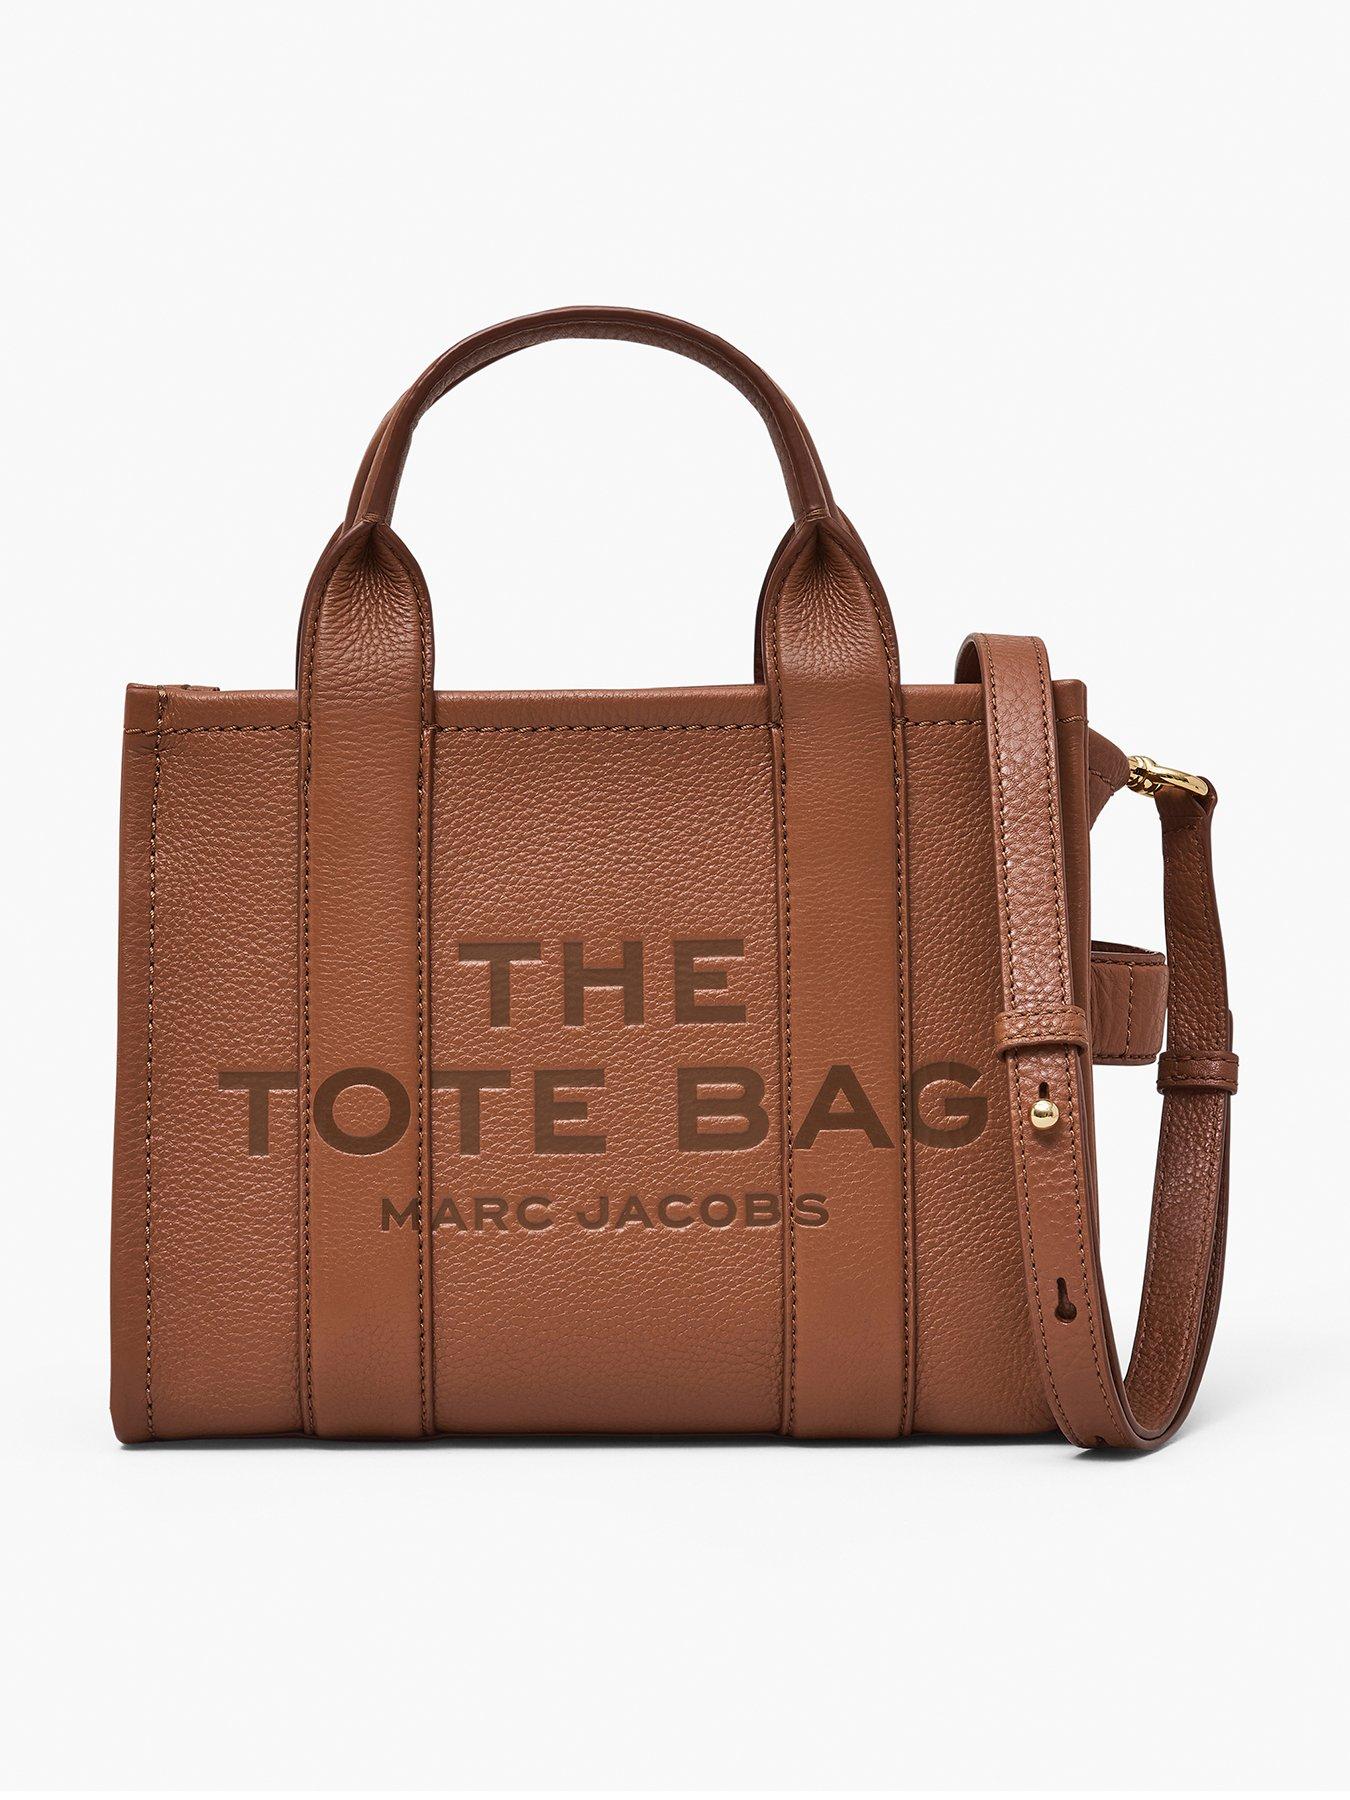 MARC JACOBS The Tote Bag  Comparison of the Small, Mini, Leather